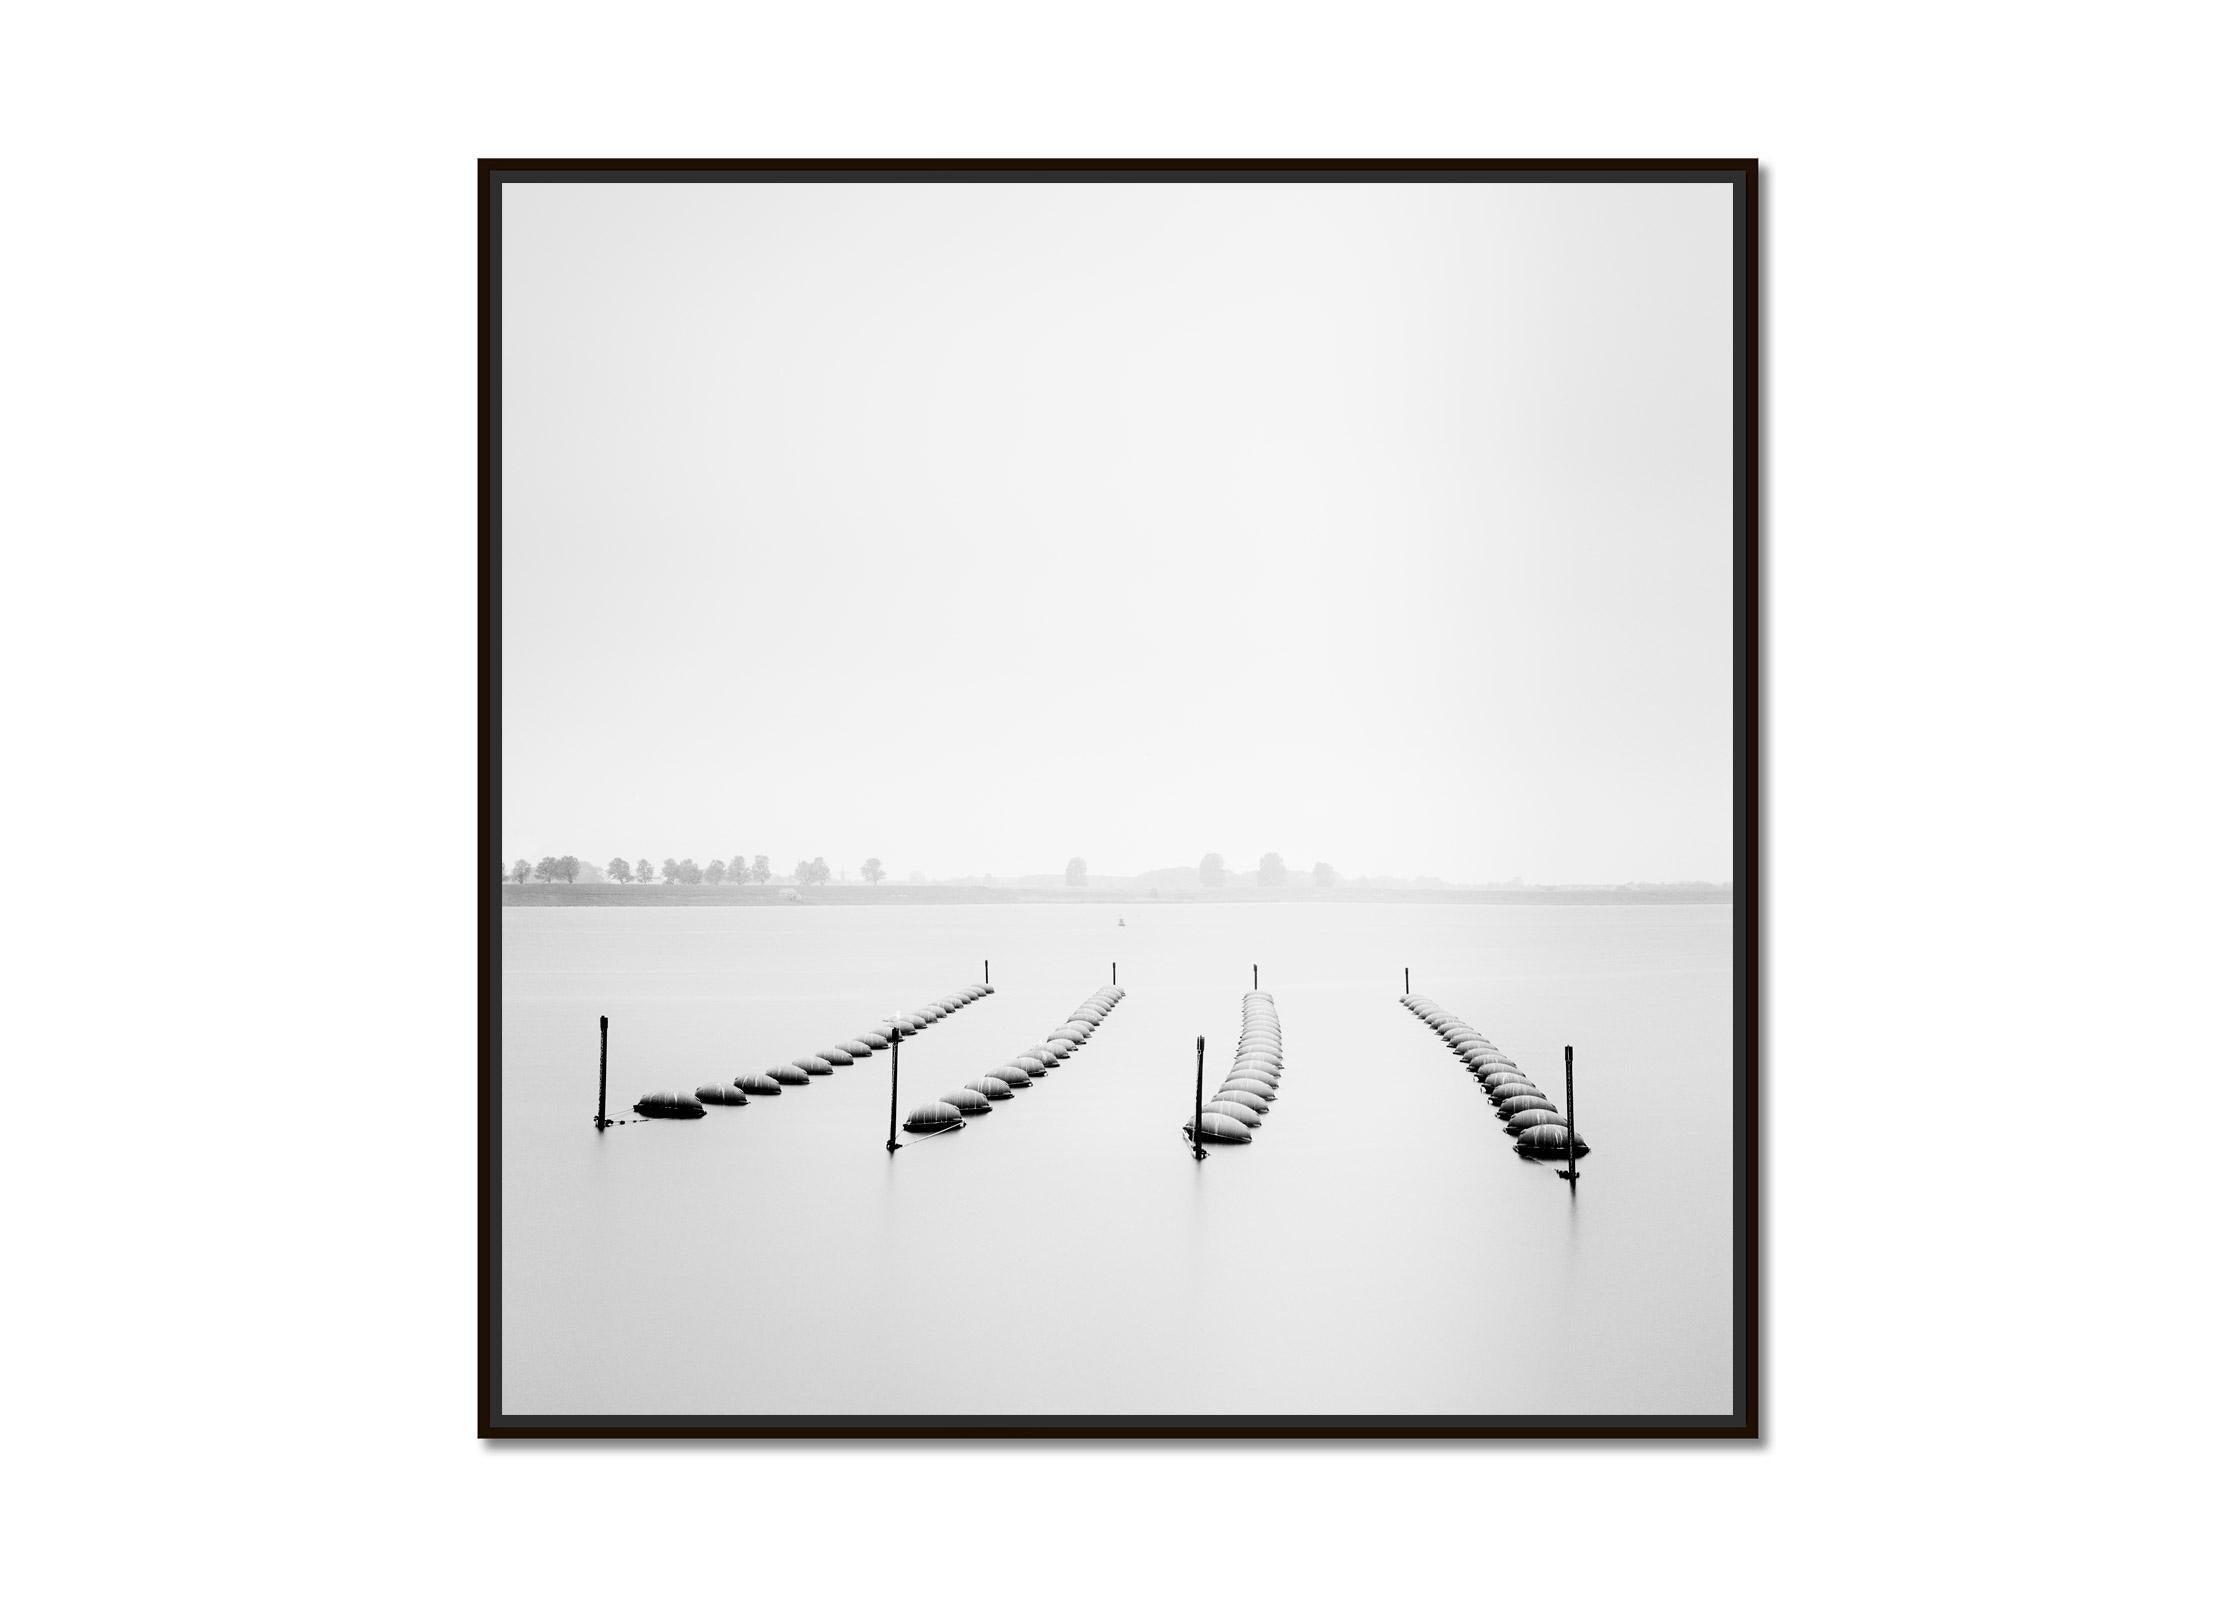 Buoys and Gulls, minimalist, black and white, waterscape, fine art photography - Photograph by Gerald Berghammer